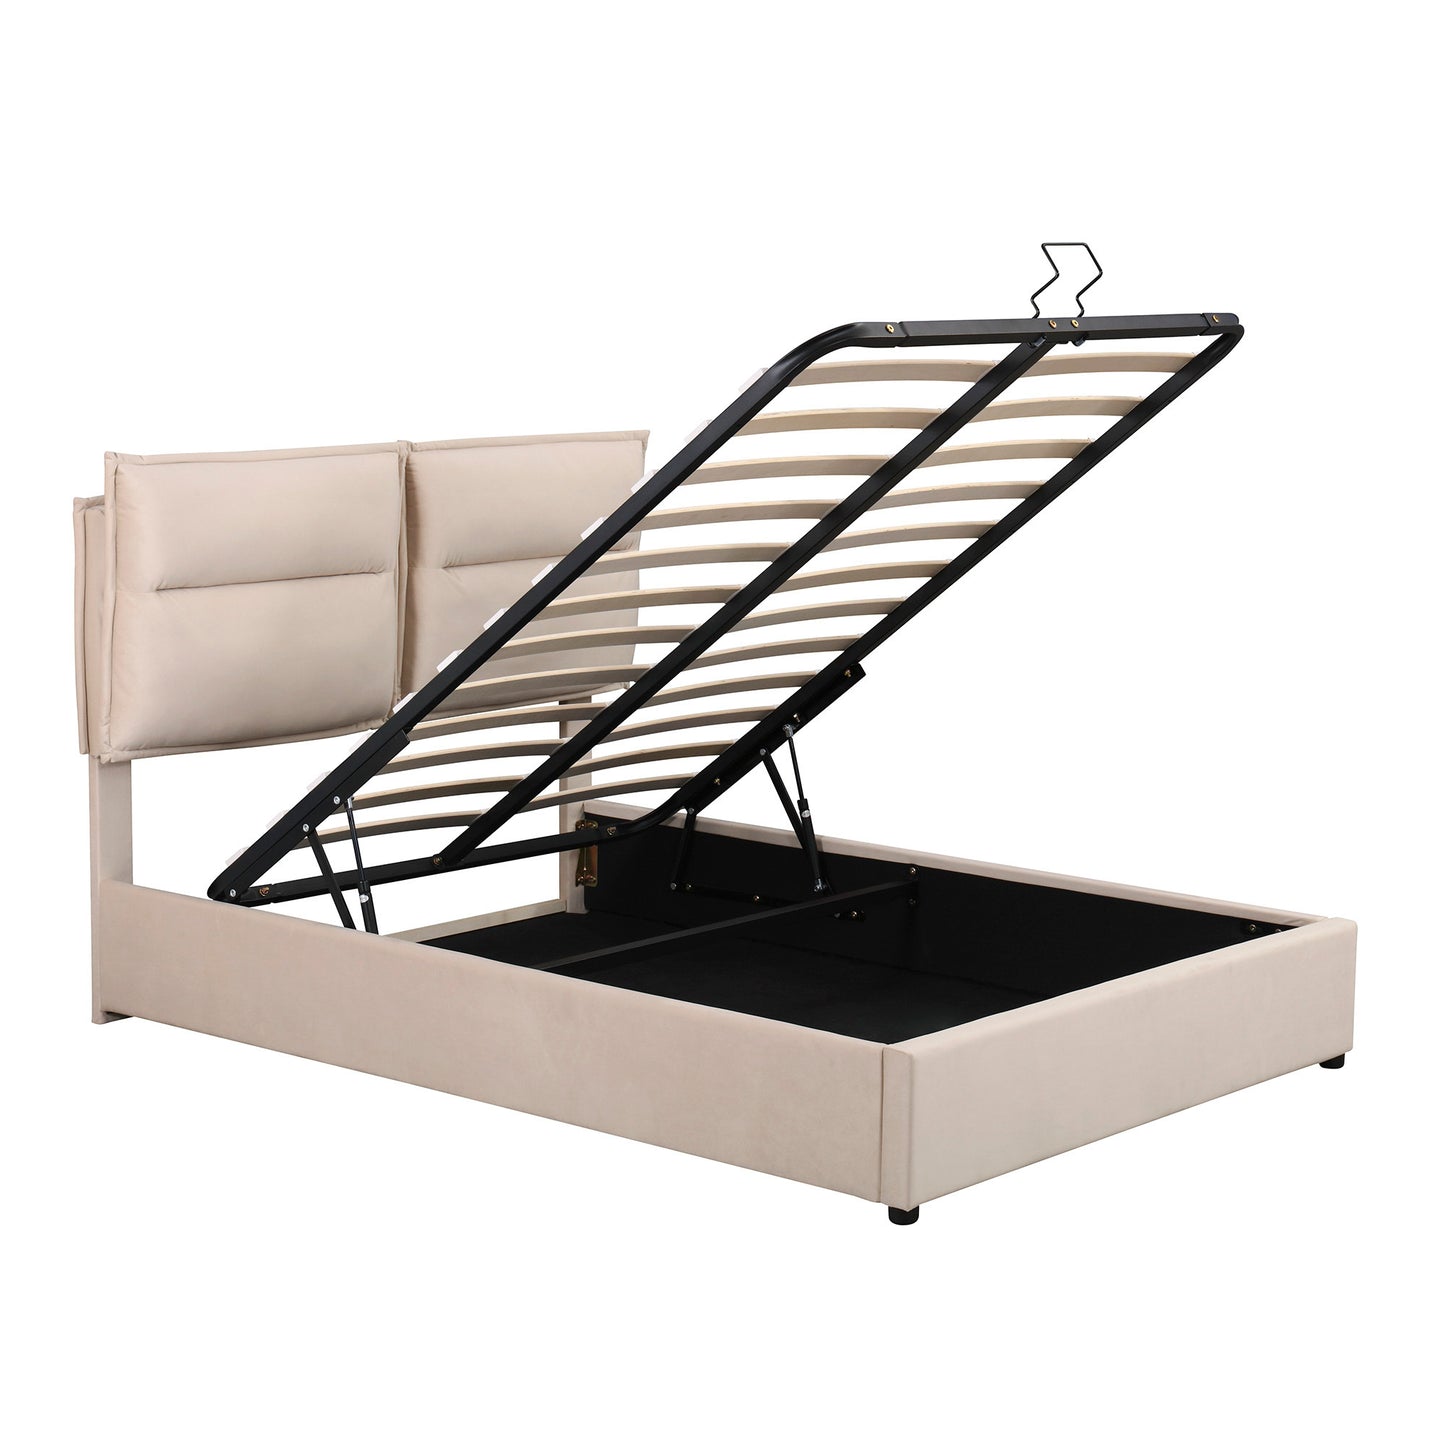 Upholstered Platform bed with a Hydraulic Storage System, Full size, Beige